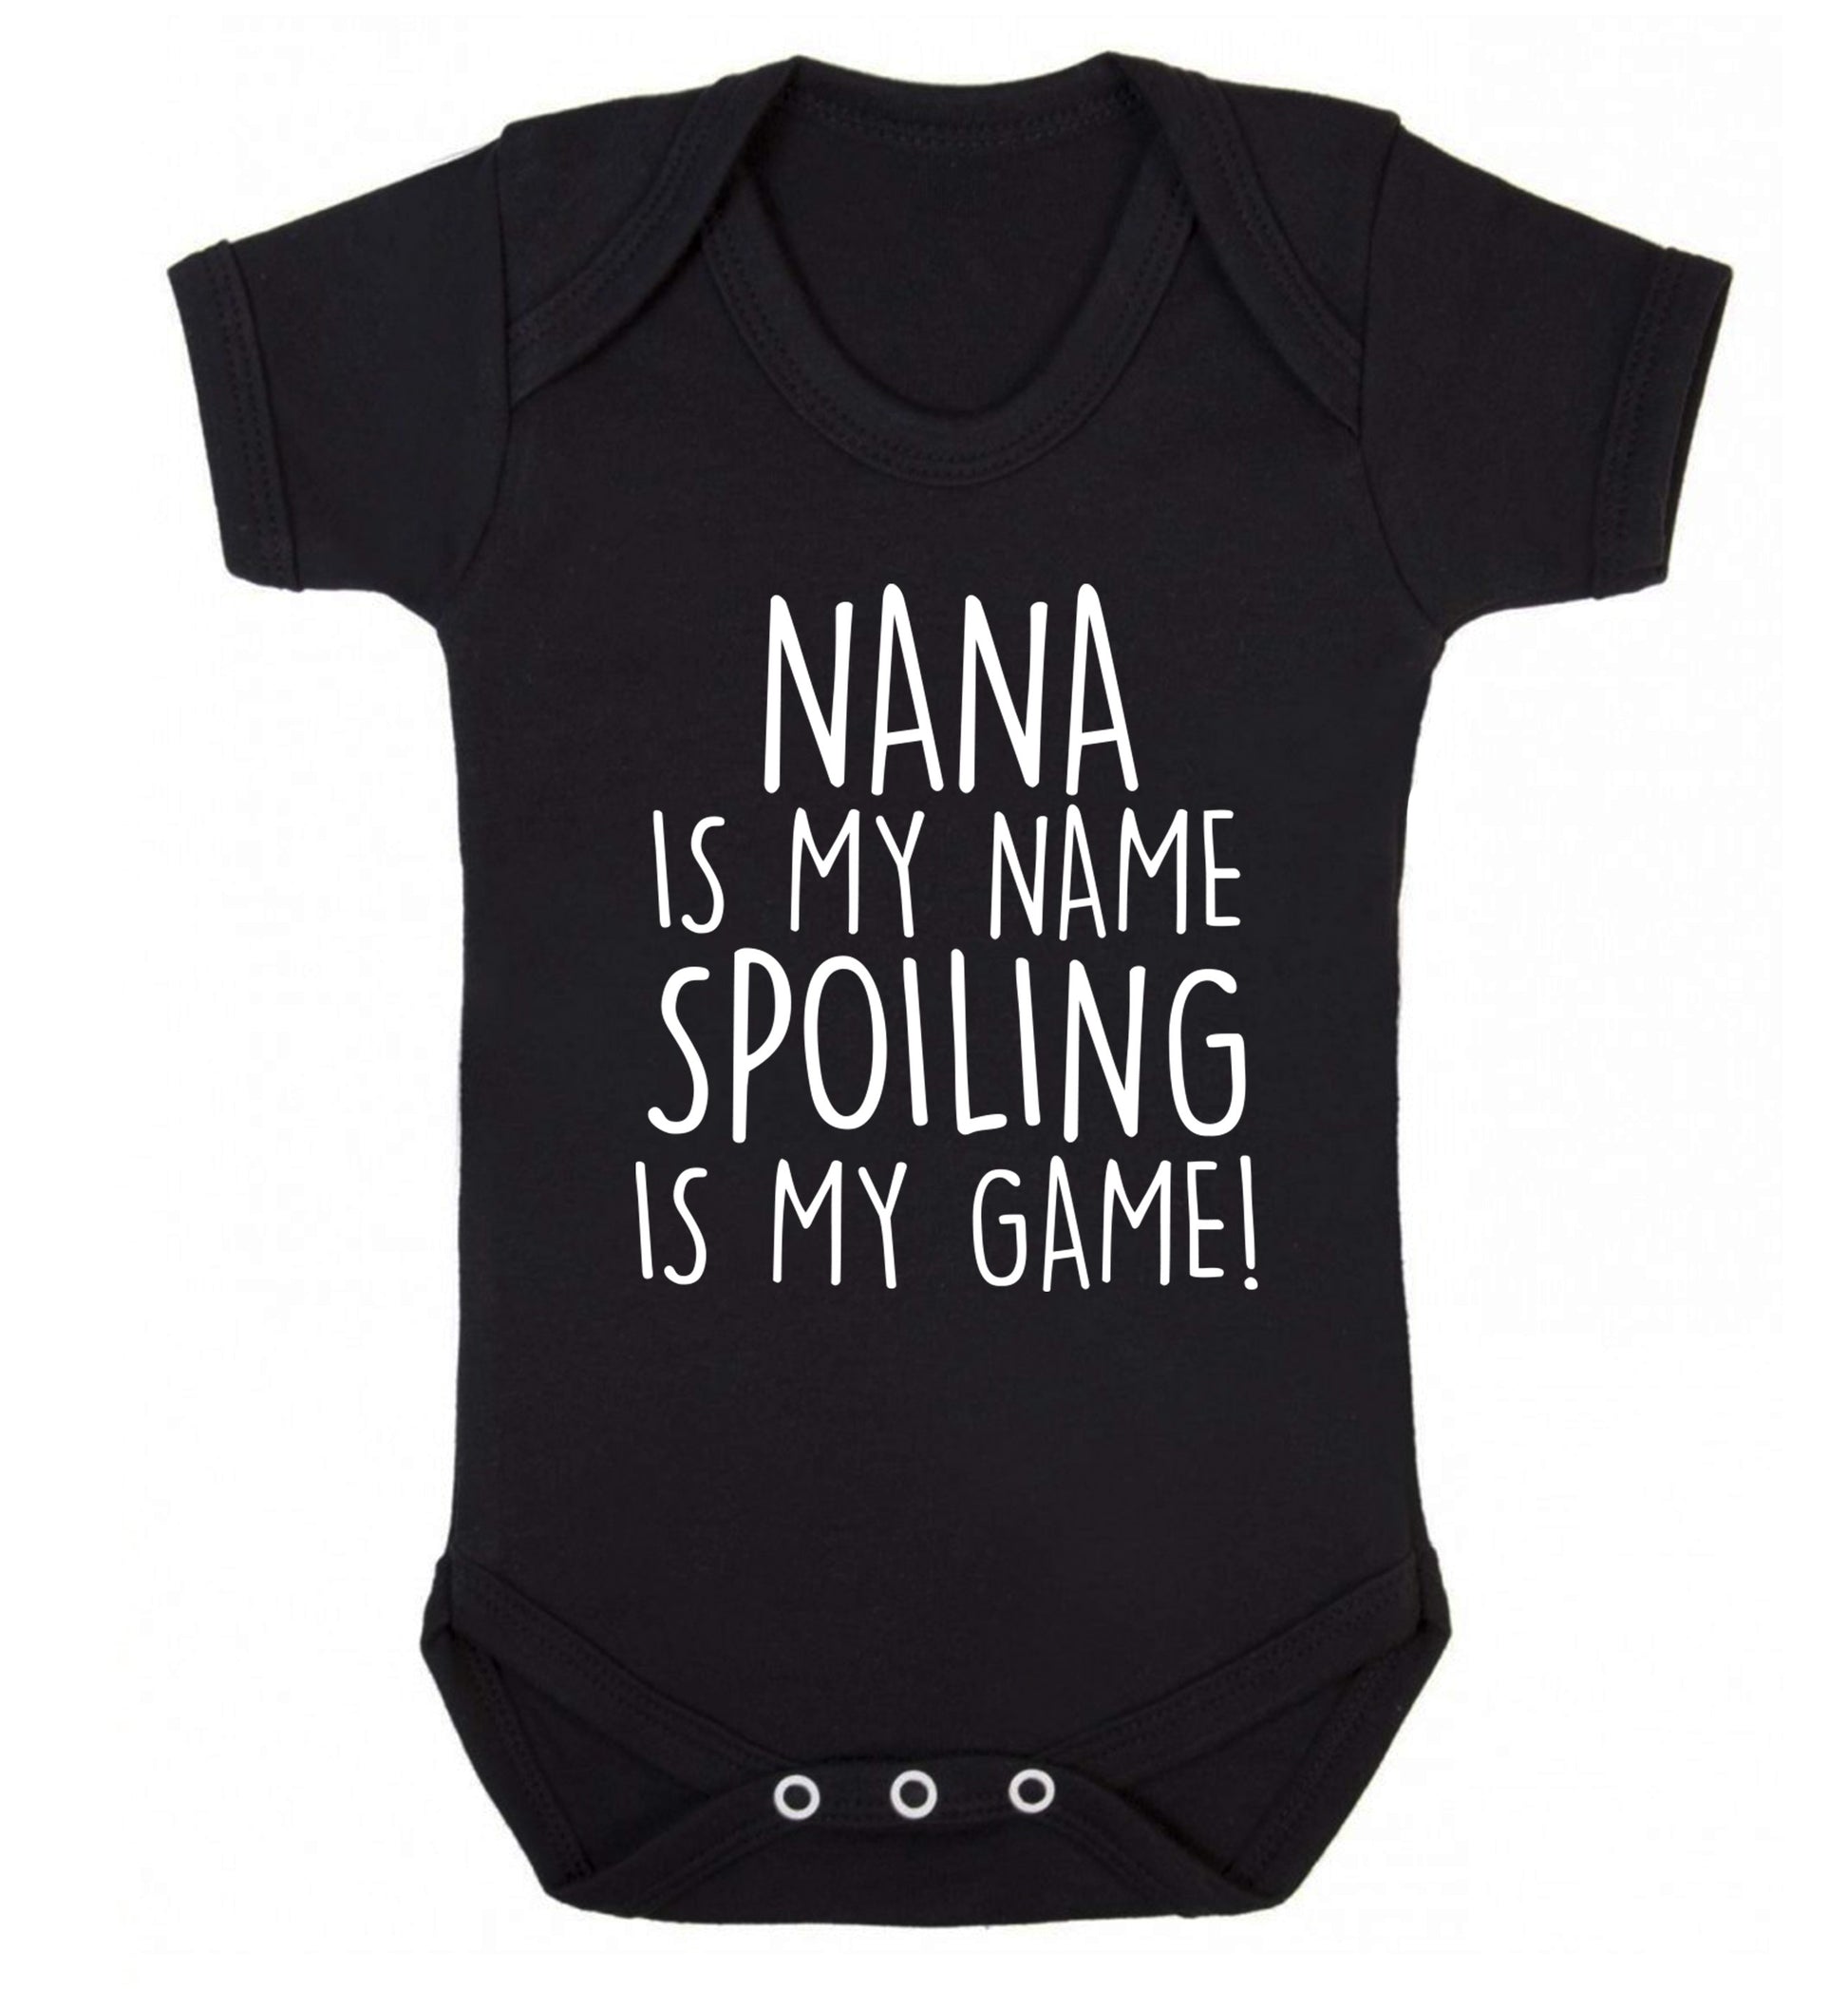 Nana is my name, spoiling is my game Baby Vest black 18-24 months